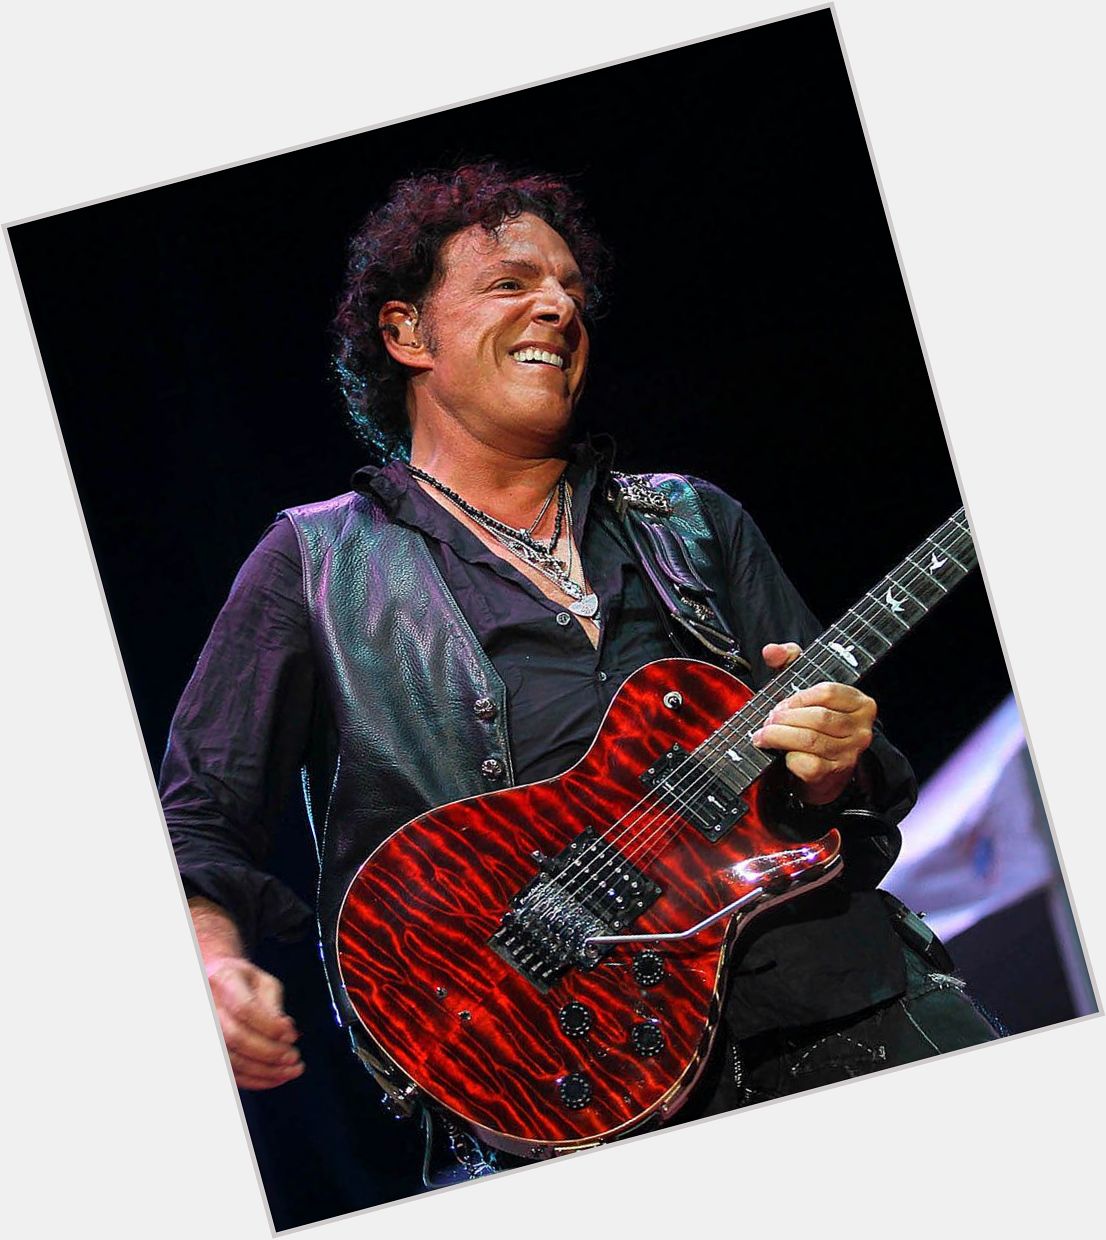 A Big BOSS Happy Birthday today to Journey\s Neal Schon from all of us at Boss Boss Radio! 